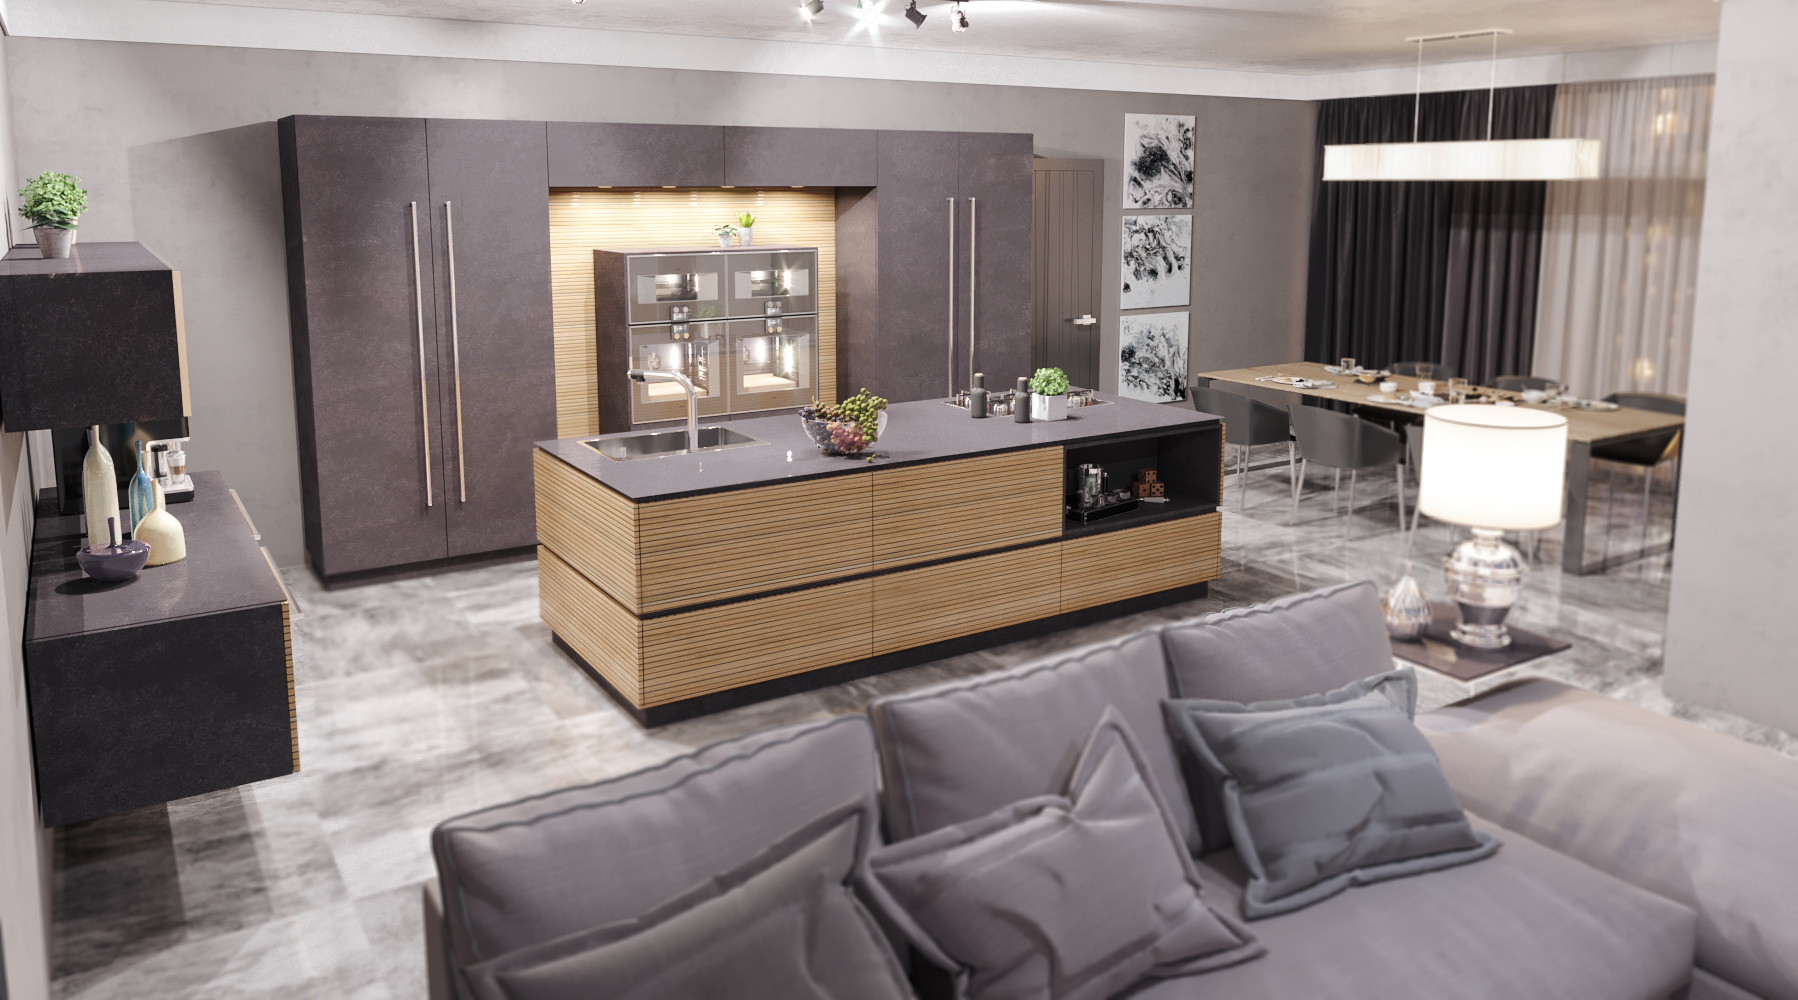 Kitchen fabrice in 3d max corona render image